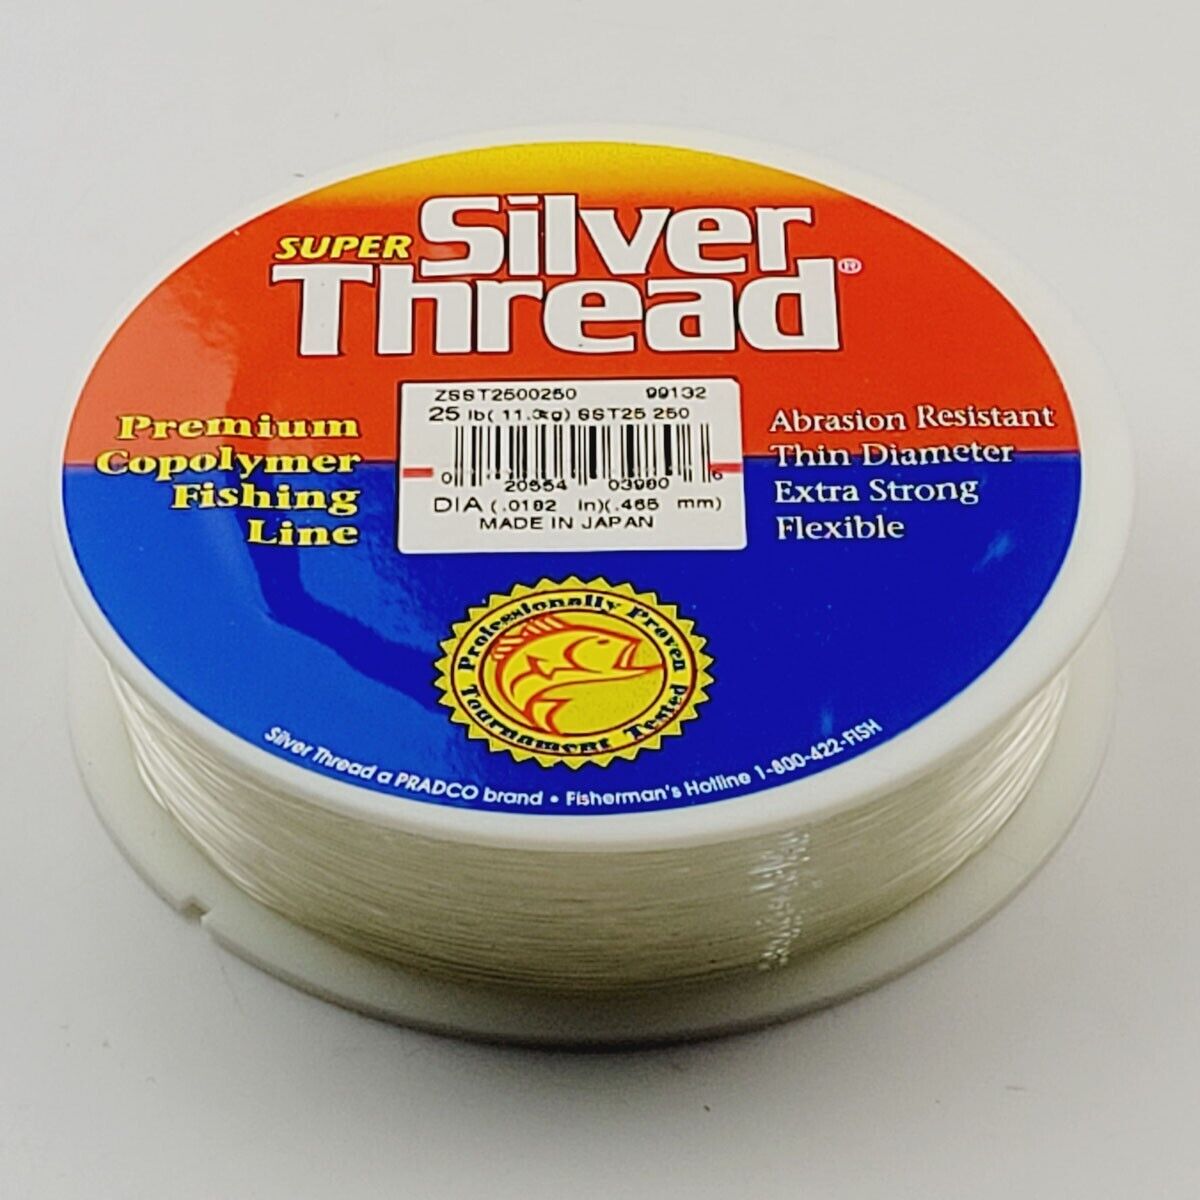 Silver Thread Copolymer Monofilament Fishing Line CLEAR 25 lbs